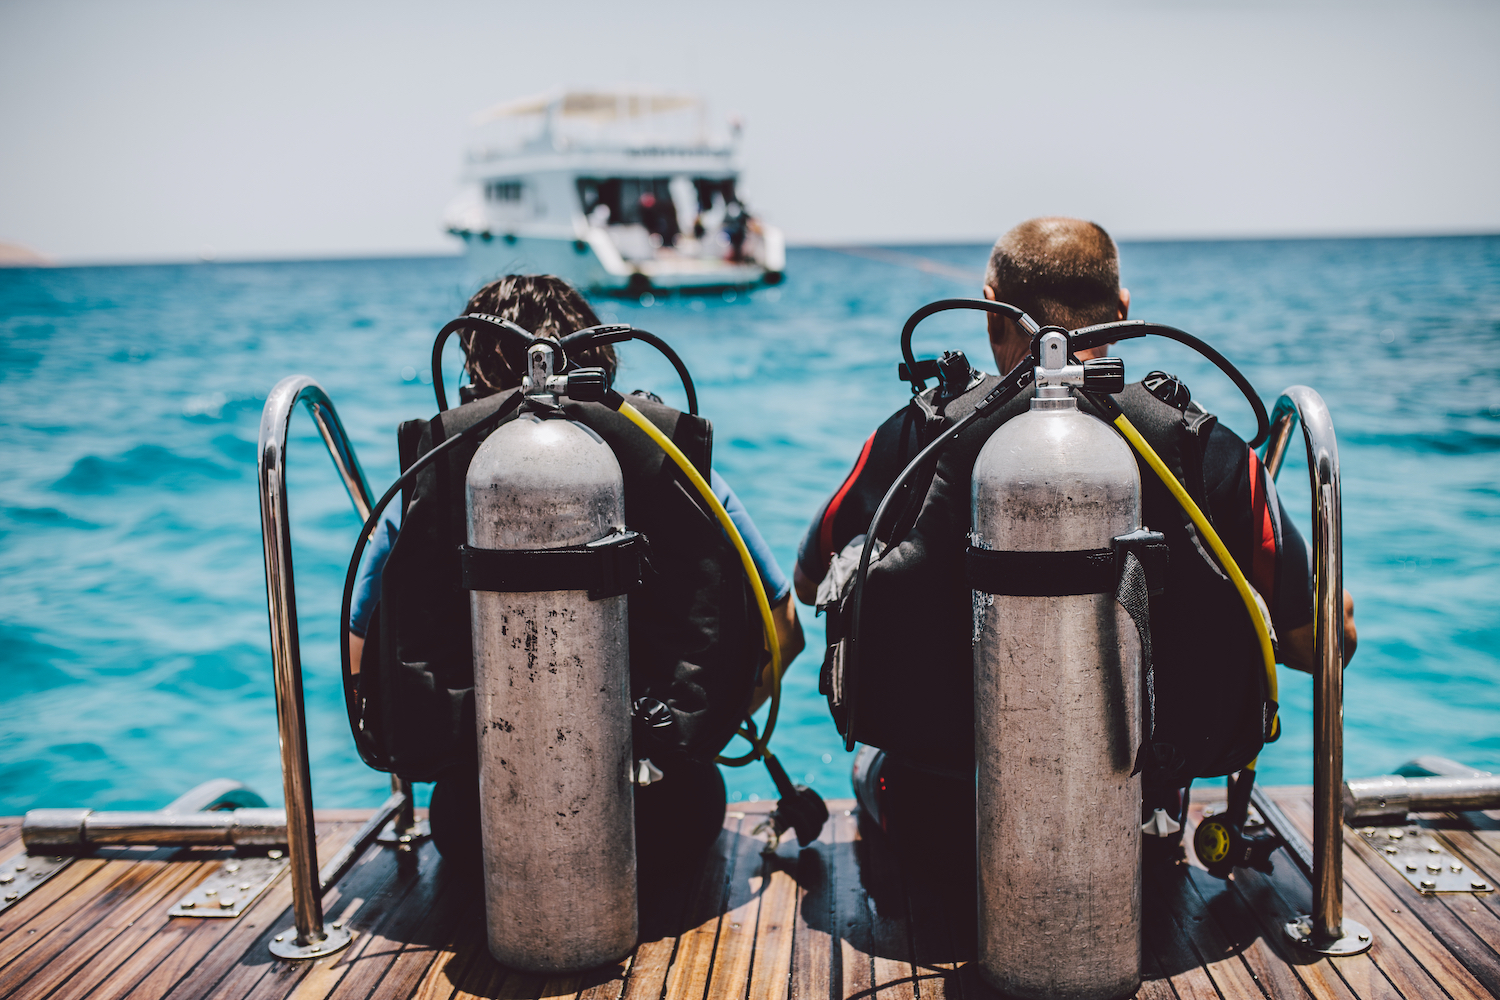 Two divers on a boat getting ready to dive and learning how to get over thalassophobia and a fear of what’s beneath the water